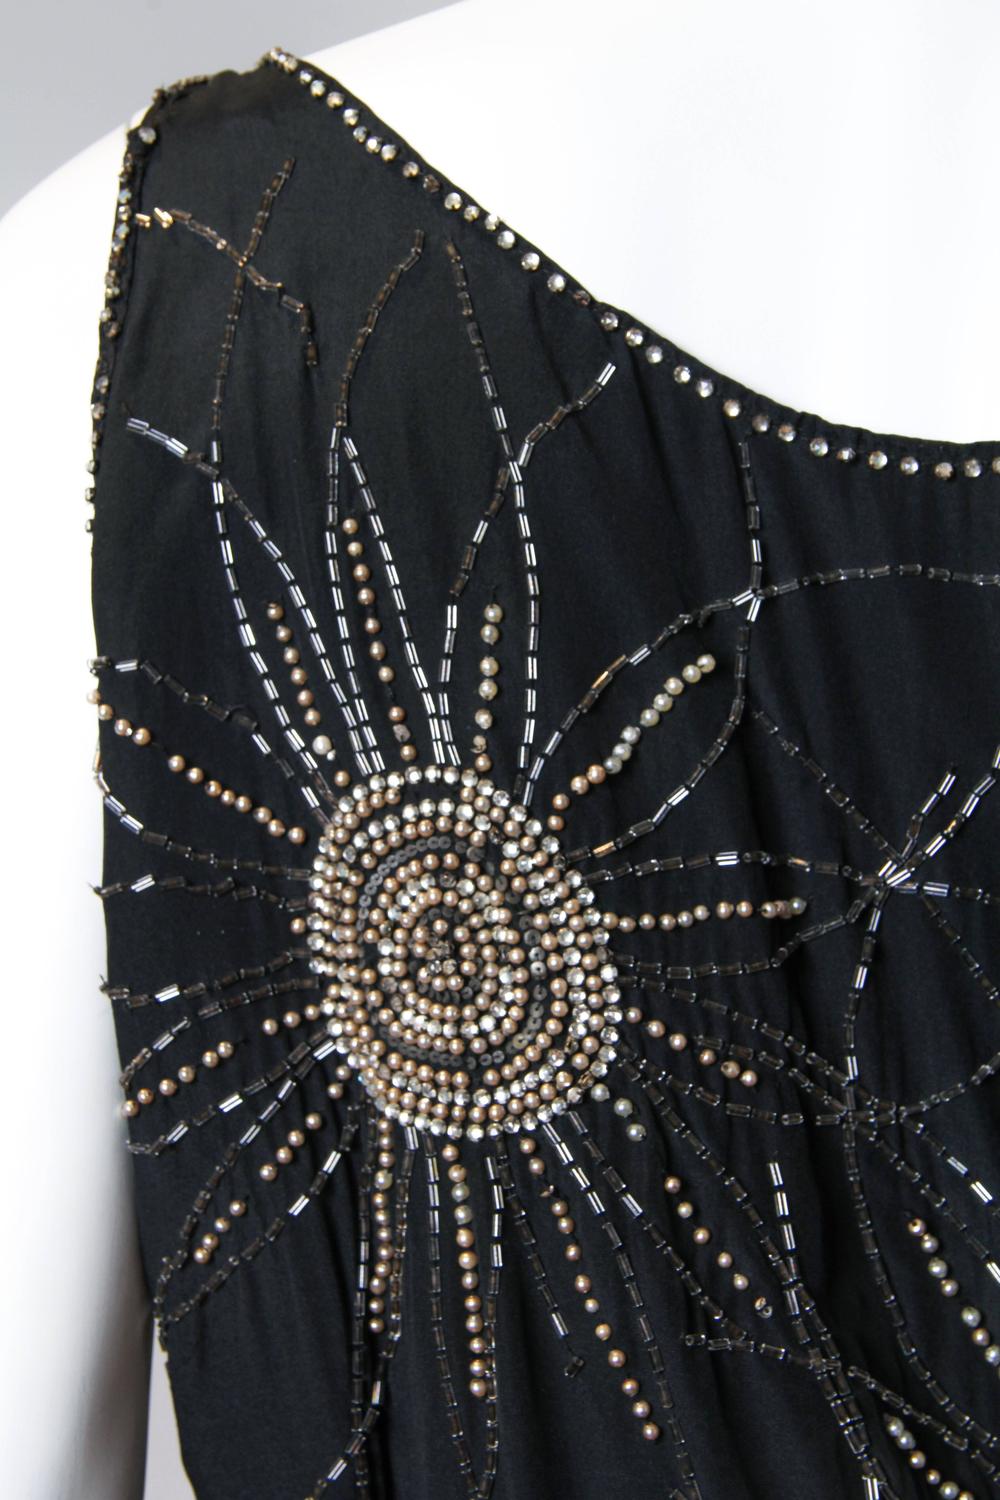 Art Deco Starbursts in Pearls and Crystals For Sale at 1stdibs